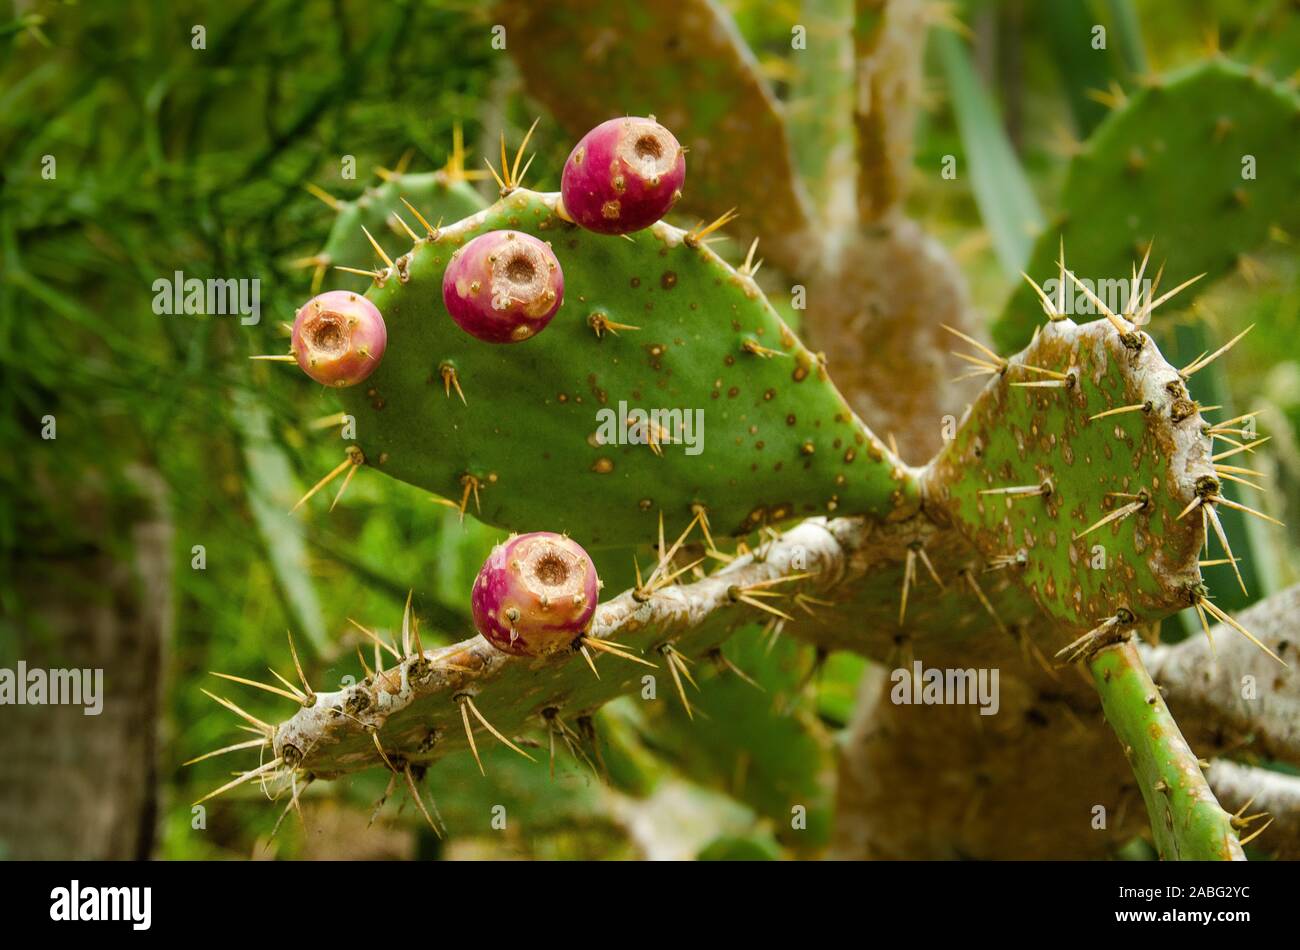 Prickly pear cactus at the Botanical Gardens in Largo Florida Stock Photo